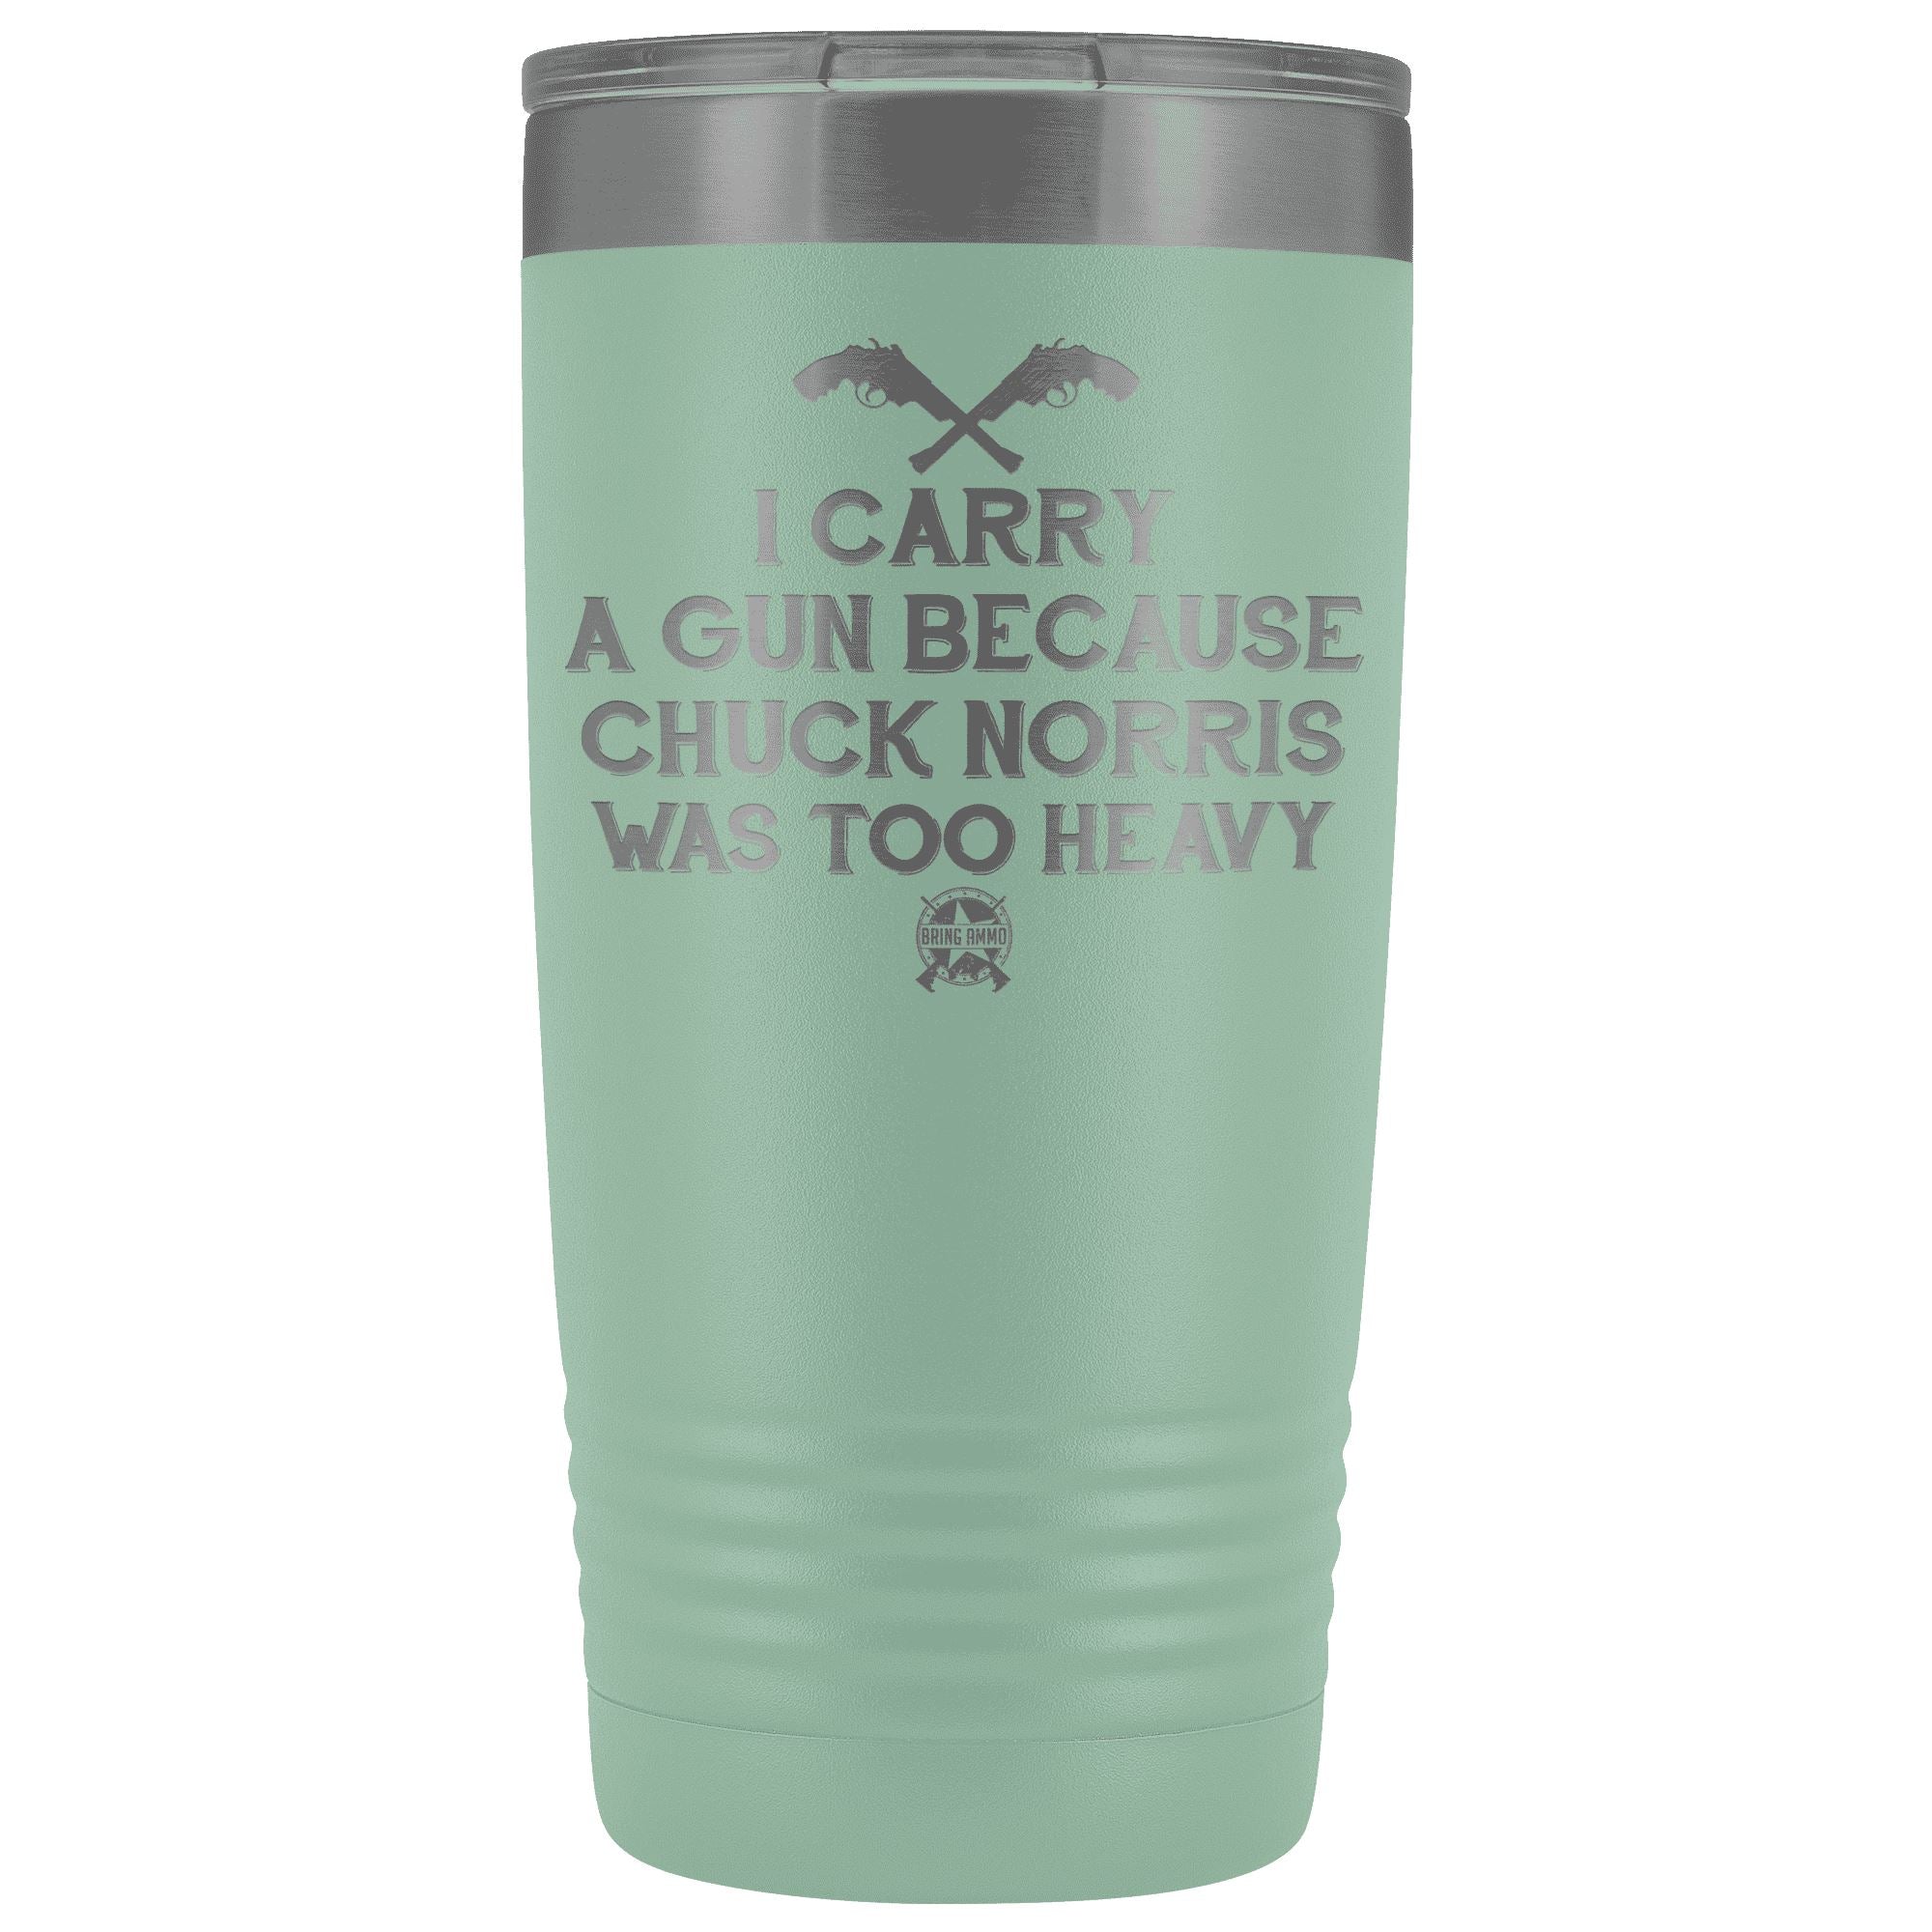 I Carry A Gun Because Chuck Norris Was Too Heavy Stainless Etched Tumbler Tumblers Teal 